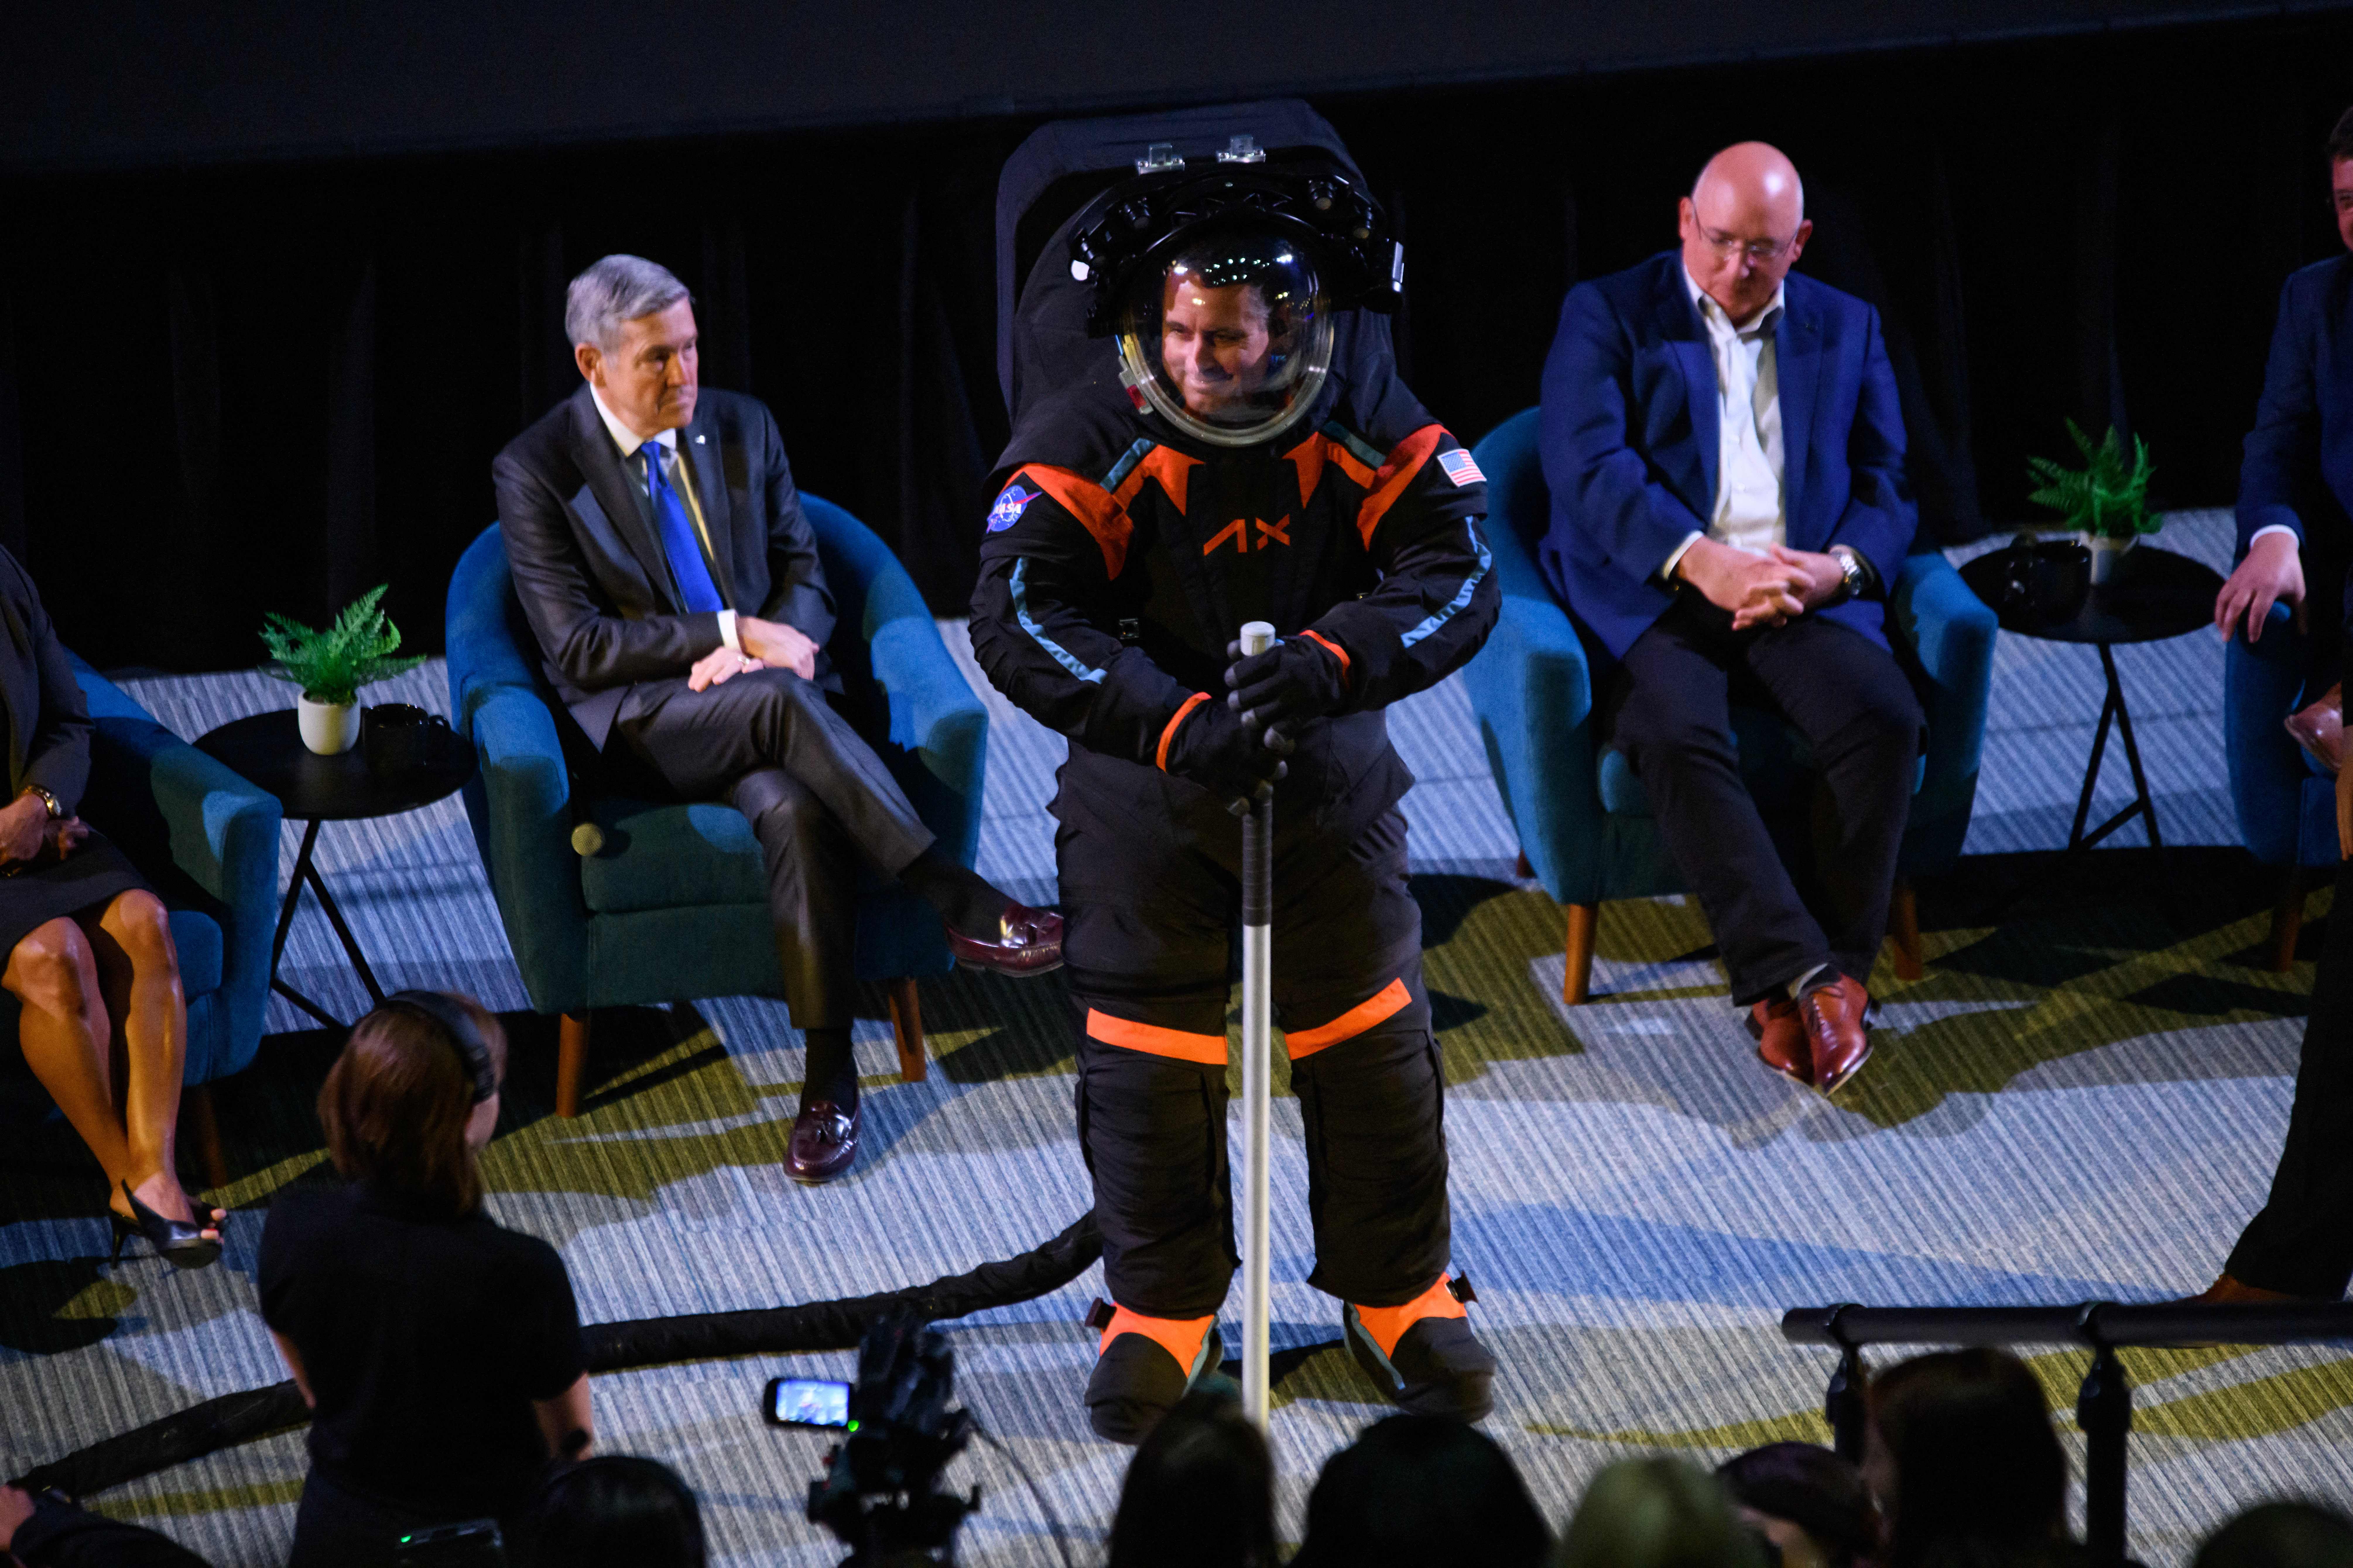 Chief engineer Jim Stein wears the new space suit during the Axiom Space Artemis III Lunar Spacesuit event on 15 March this year. The suit seen here is a ‘cover layer currently being used for display purposes only to conceal the suits proprietary design’, as per Axiom